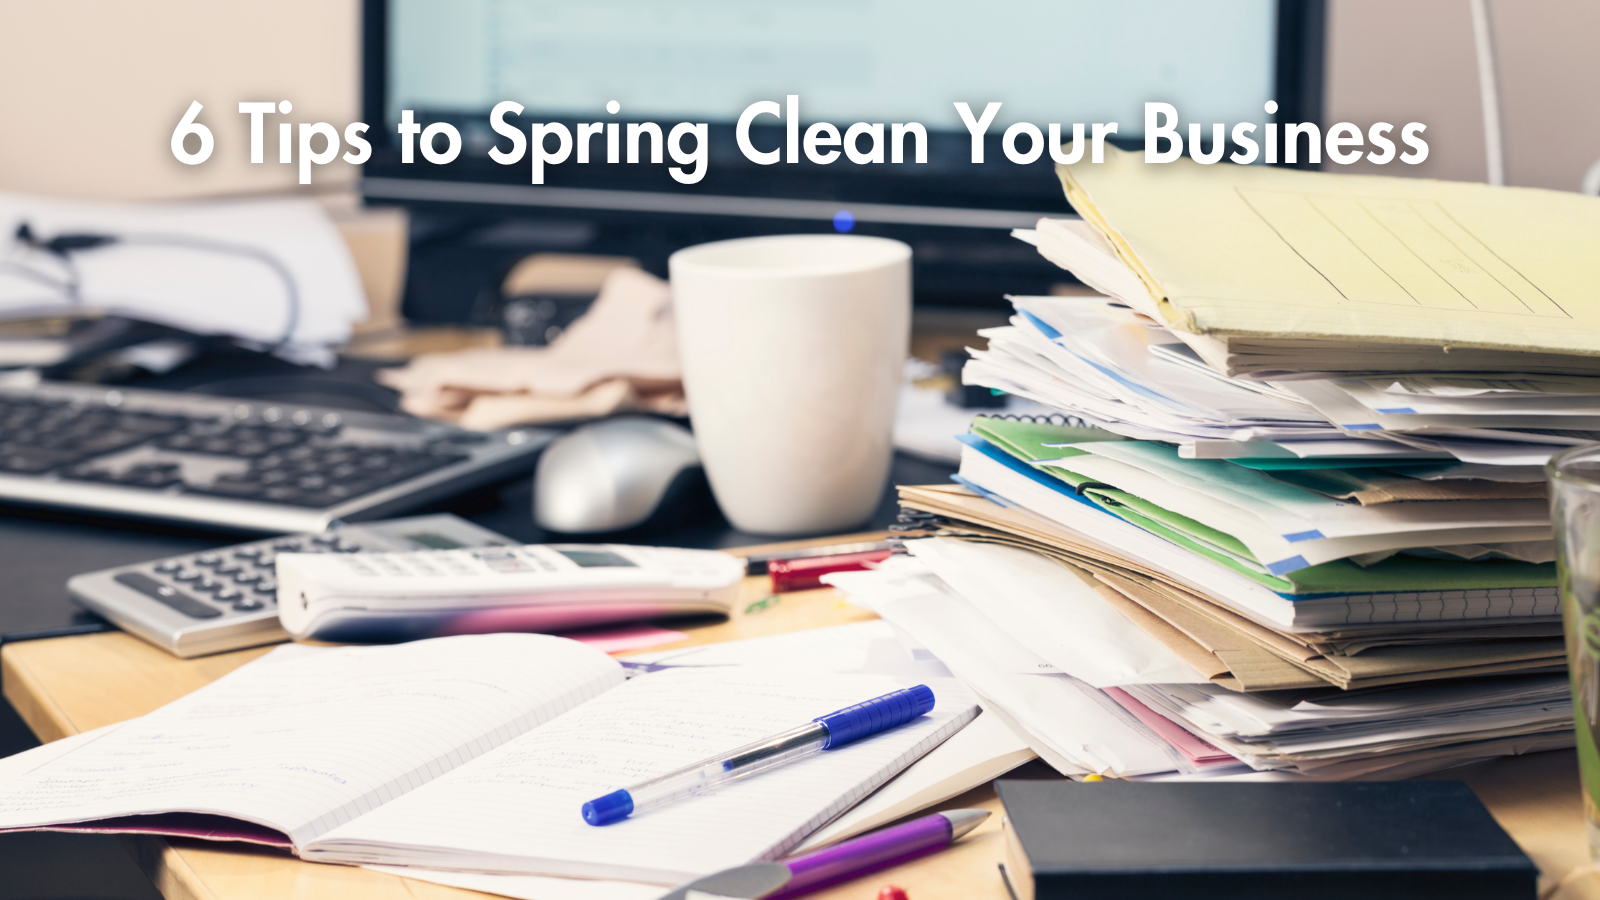 6 Tips to Spring Clean Your Business